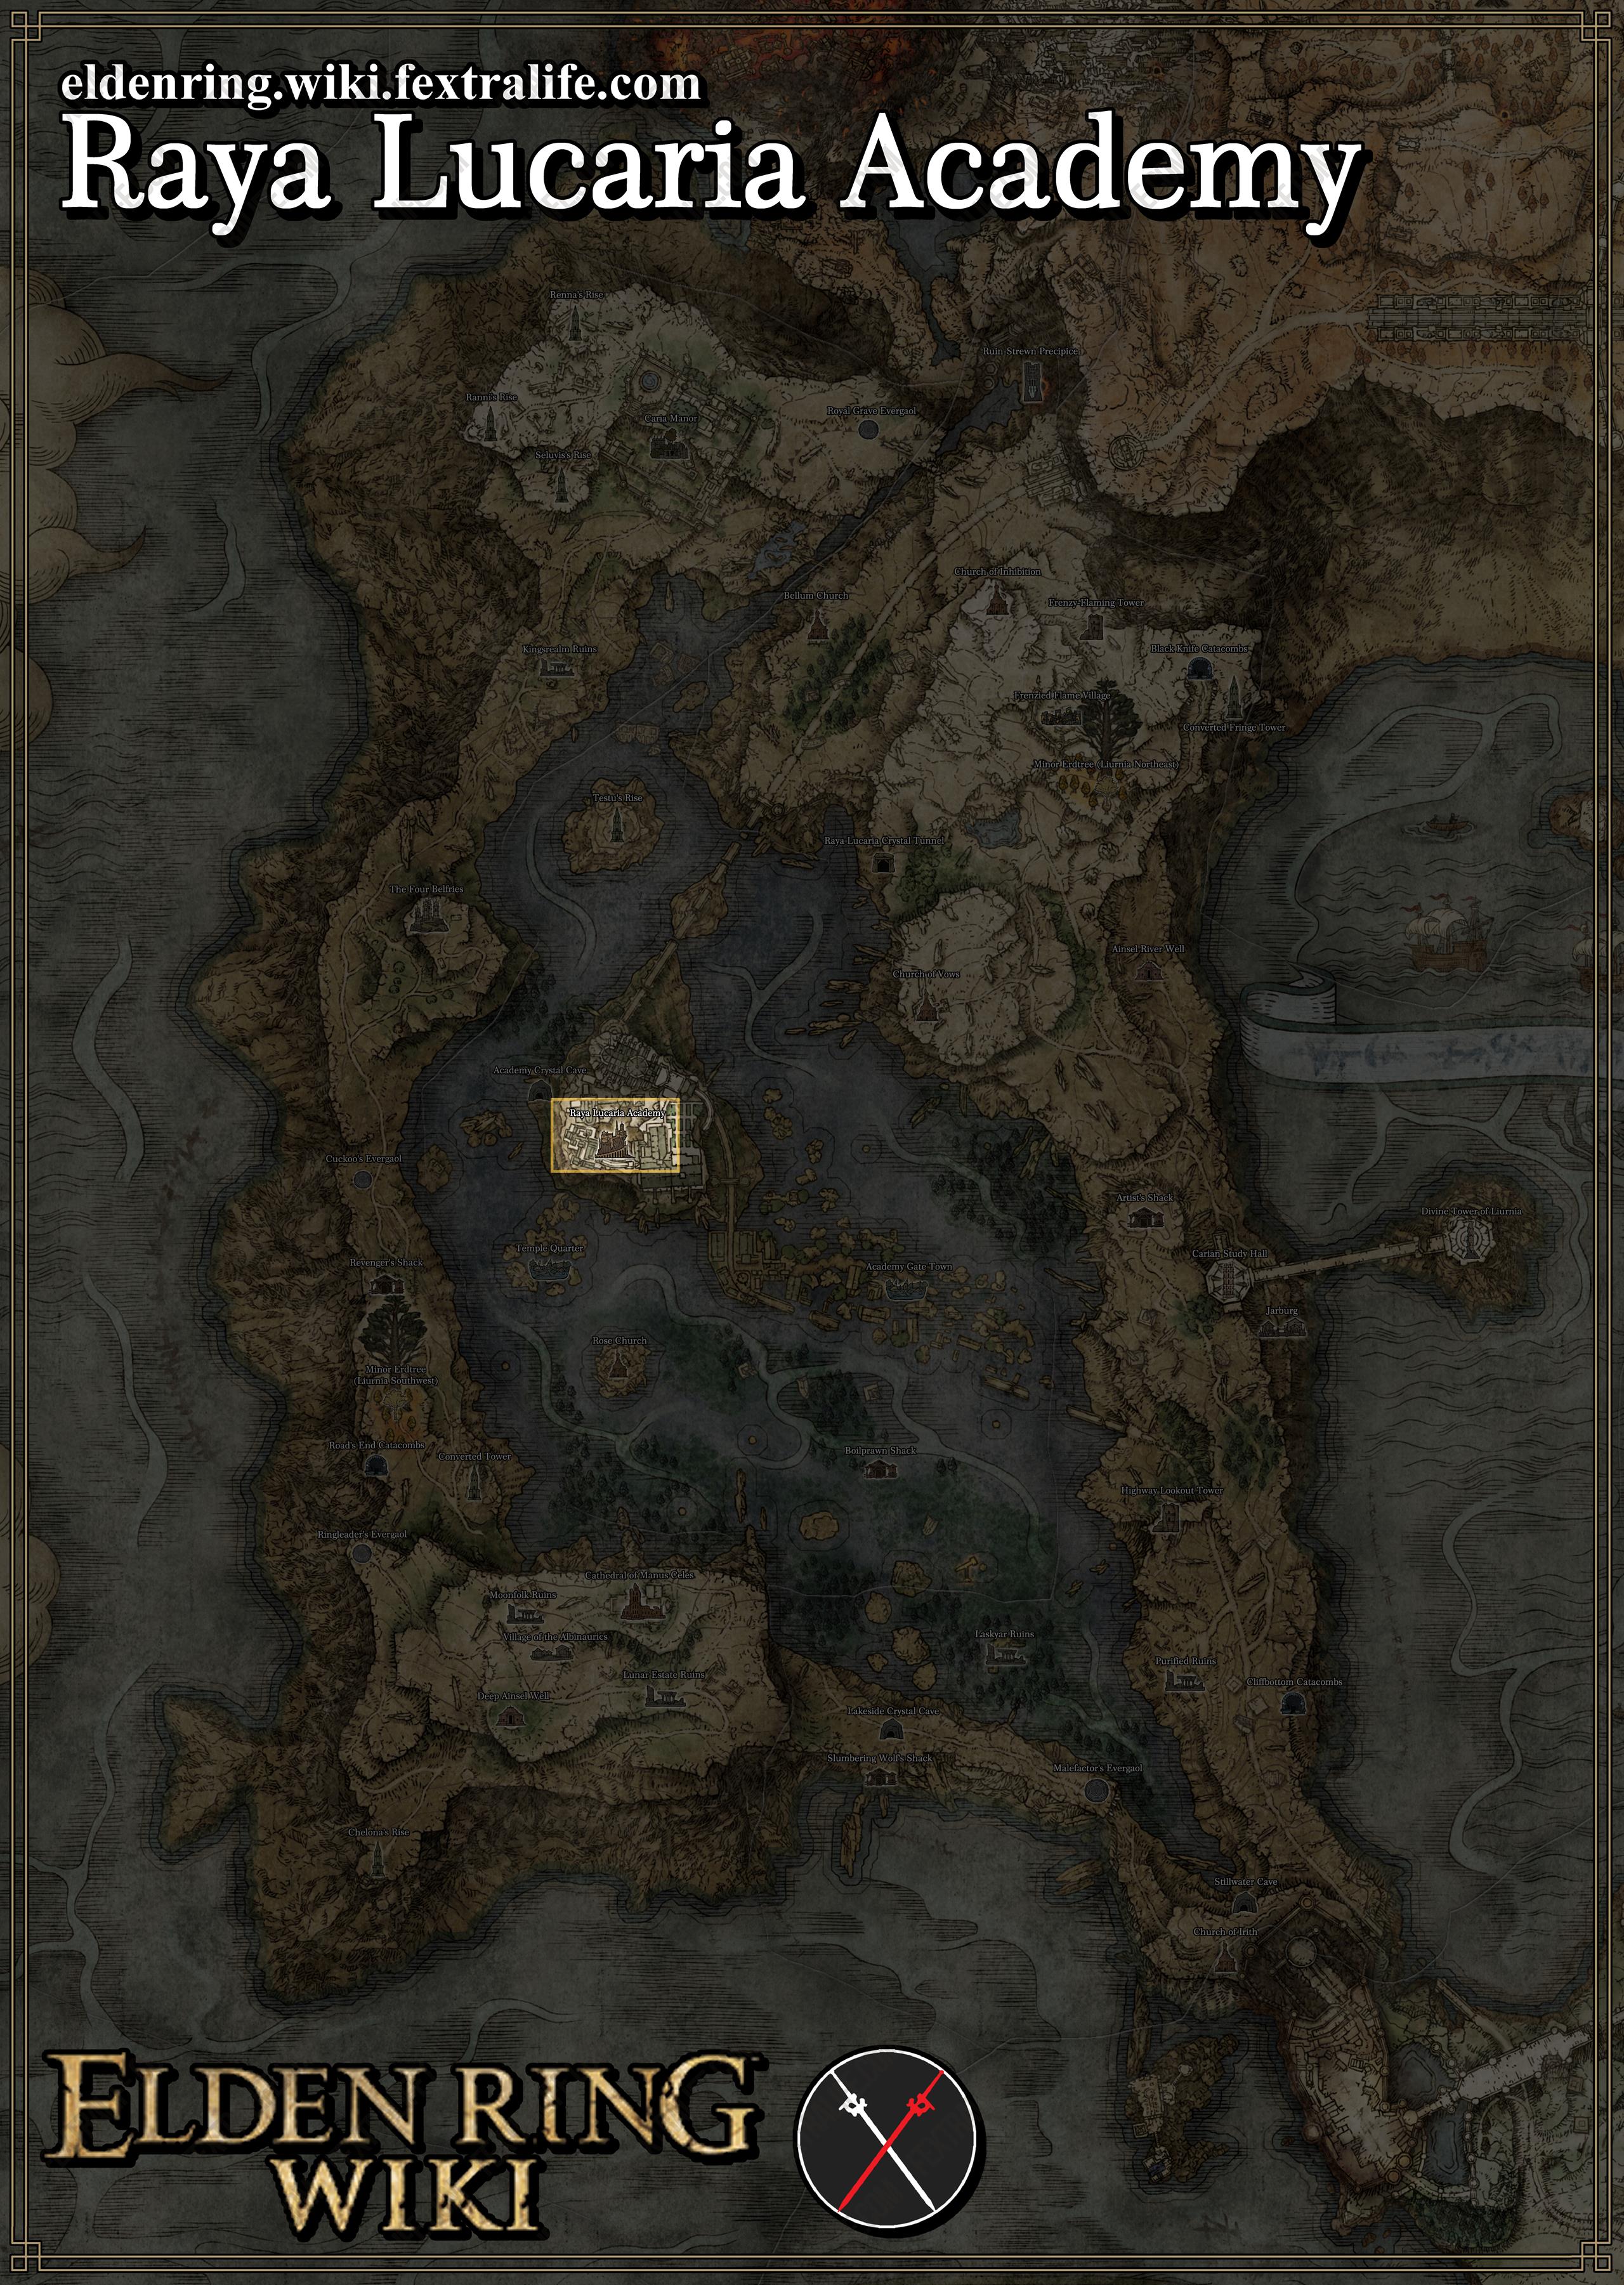 Elden Ring Academy of Raya Lucaria: All Item Locations Guide 